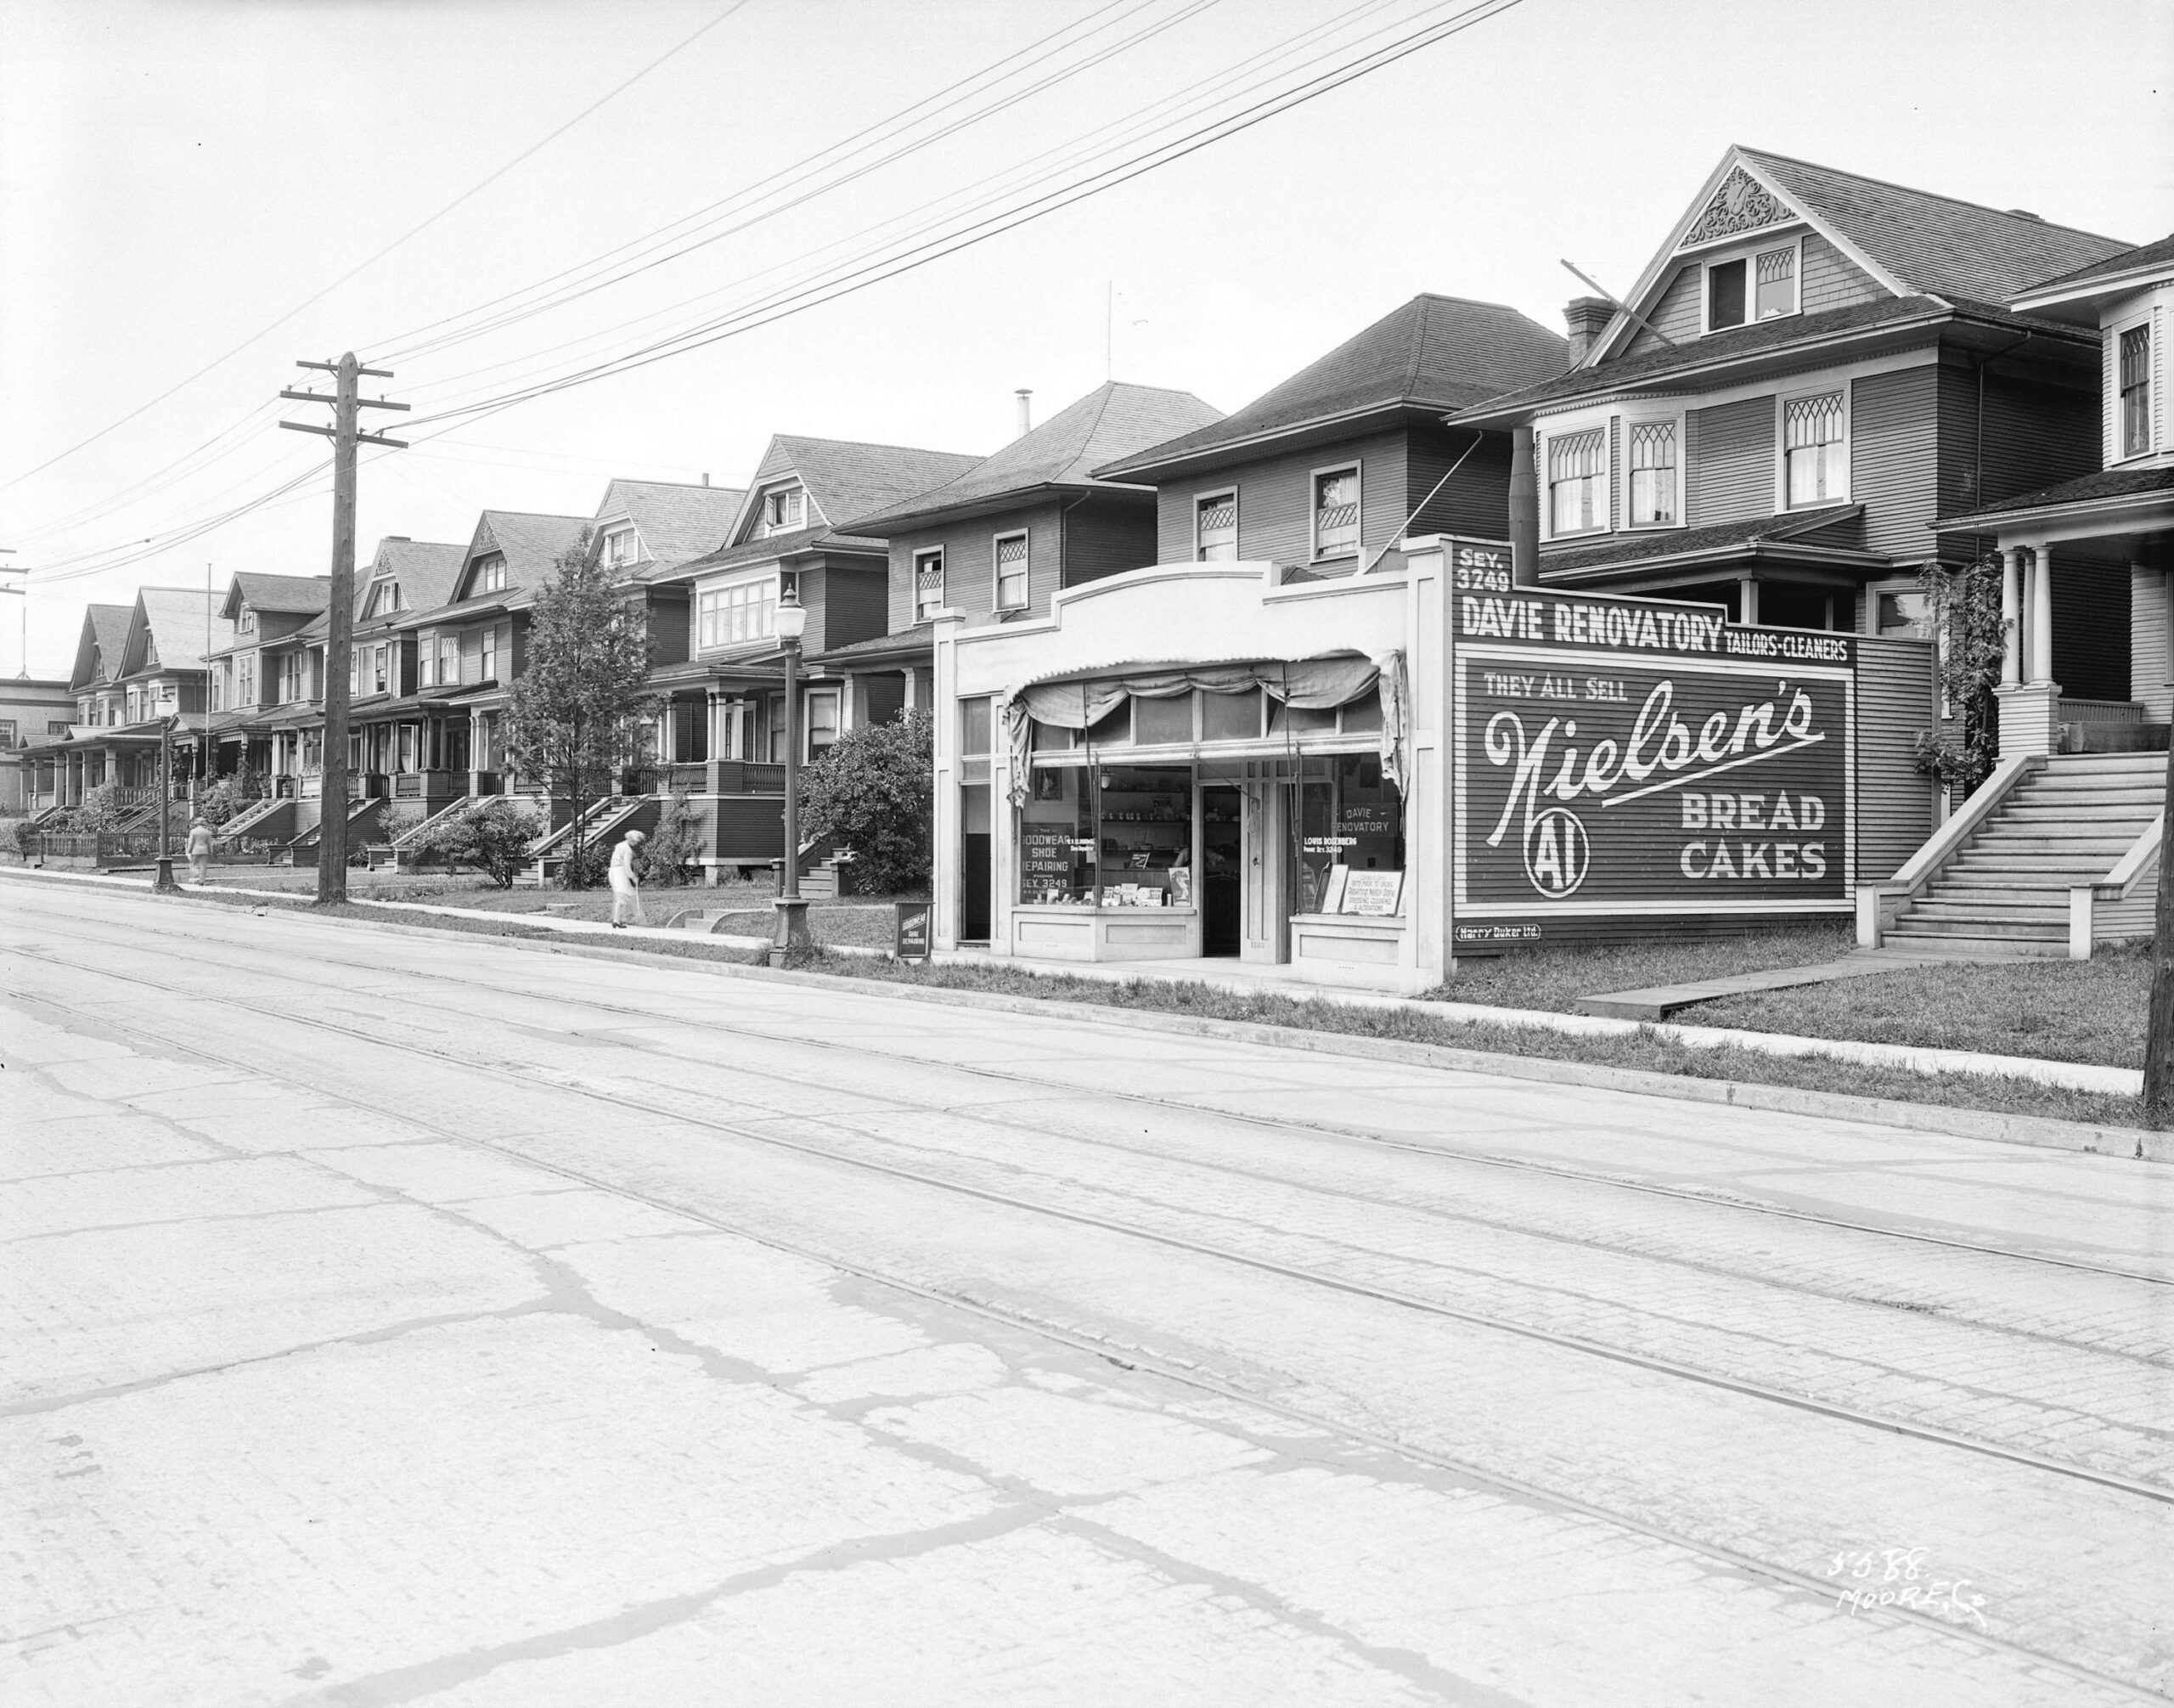 A store front that appears more like a box addition to the exterior of a house on Davie Street between Thurlow and Bute Streets, 1928. Reference code: AM54-S4-: Str N266.1